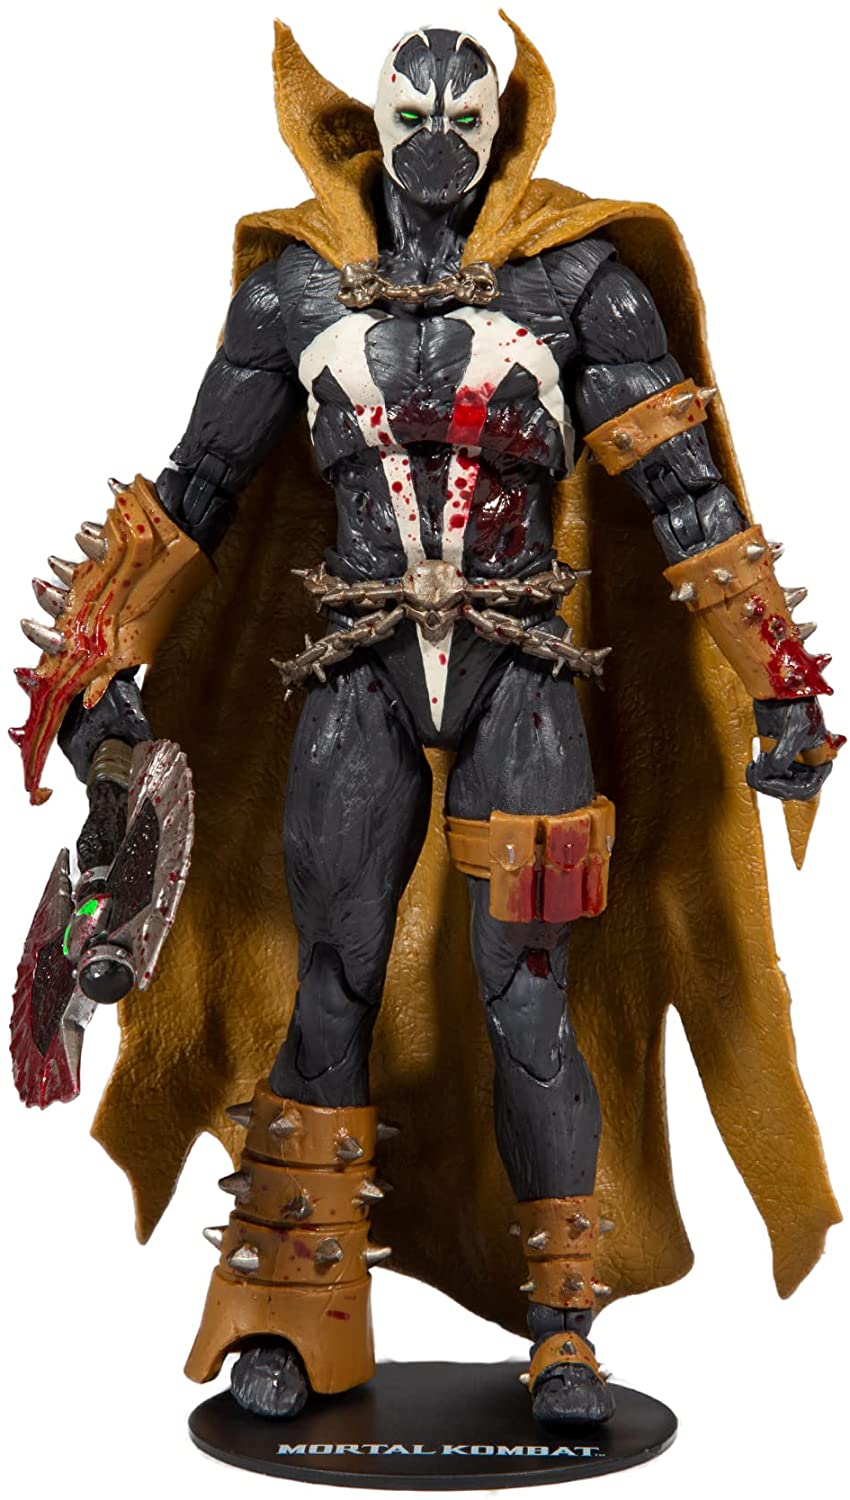 Mortal Kombat Spawn Bloody Classic 7" Action Figure with Accessories - Action & Toy Figures Heretoserveyou